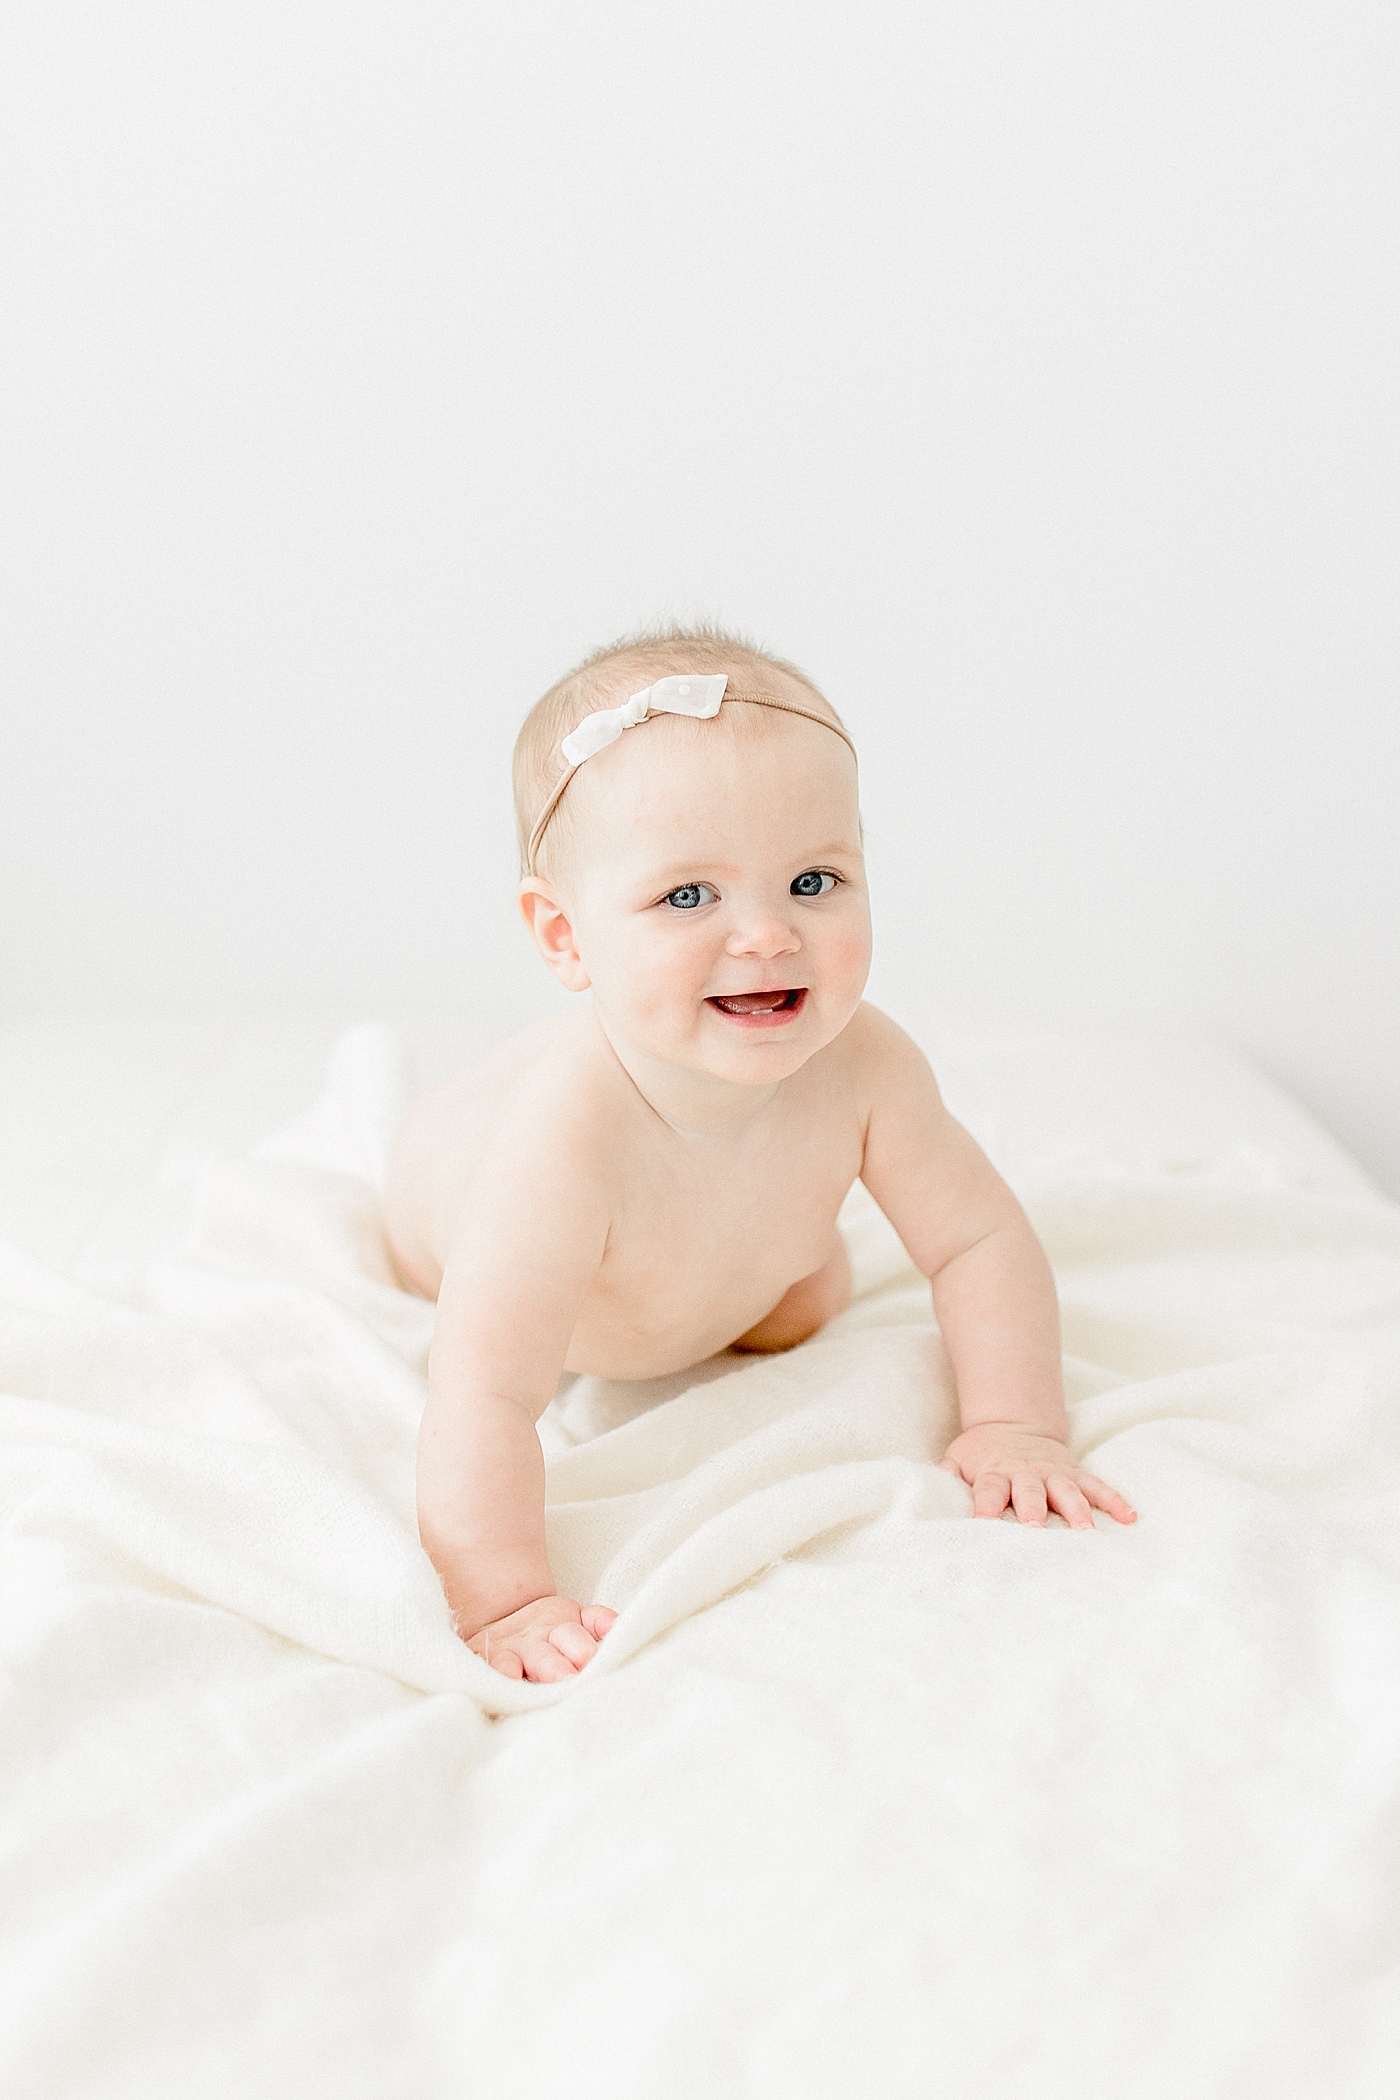 9 month old baby crawling for milestone photos with Brittany Elise Photography.